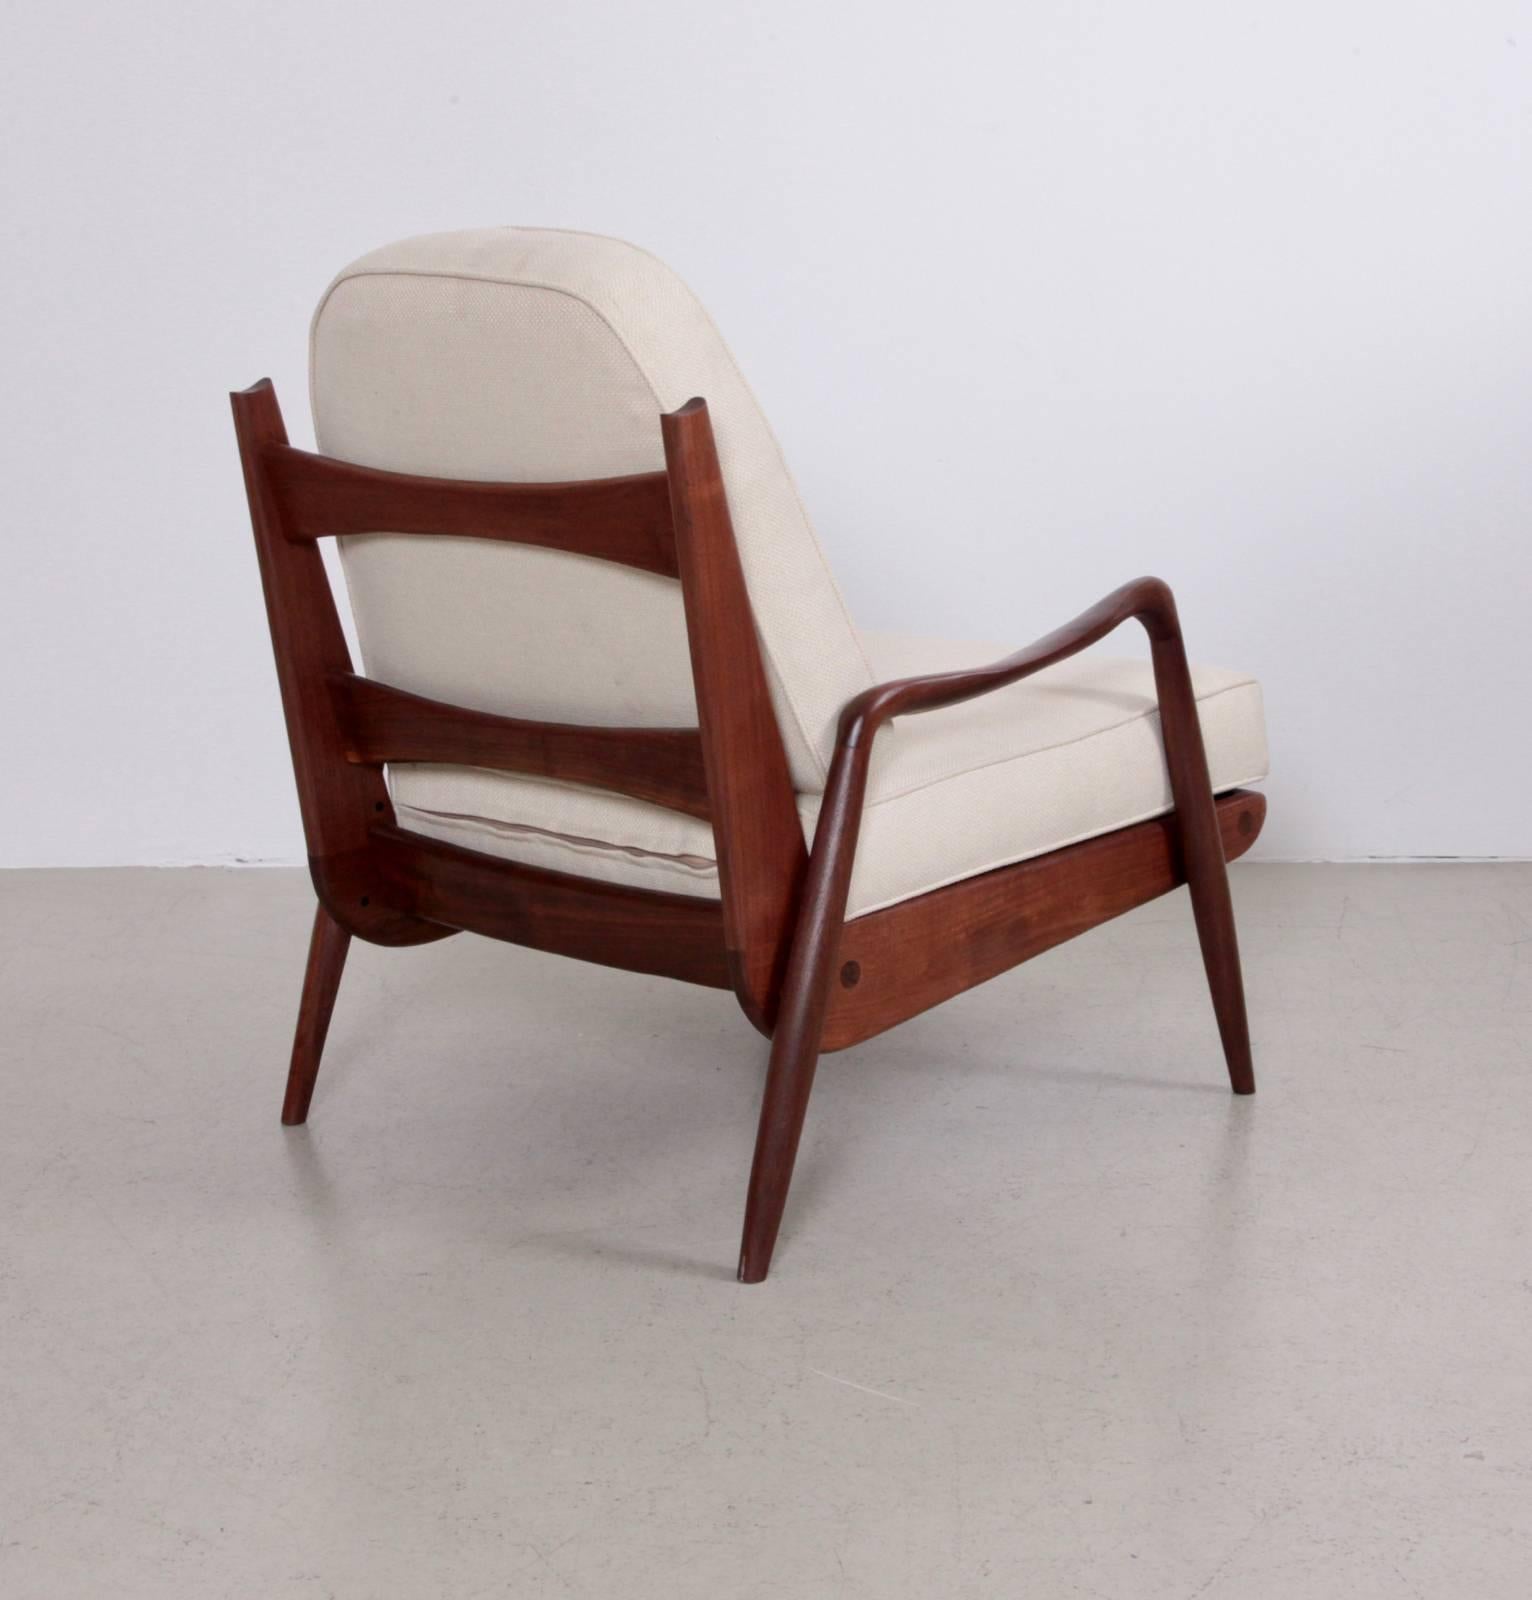 New hope easy chair, in walnut and fabric, by Philip Lloyd Powell, United States, 1960s. Organic shape and excellent condition.

